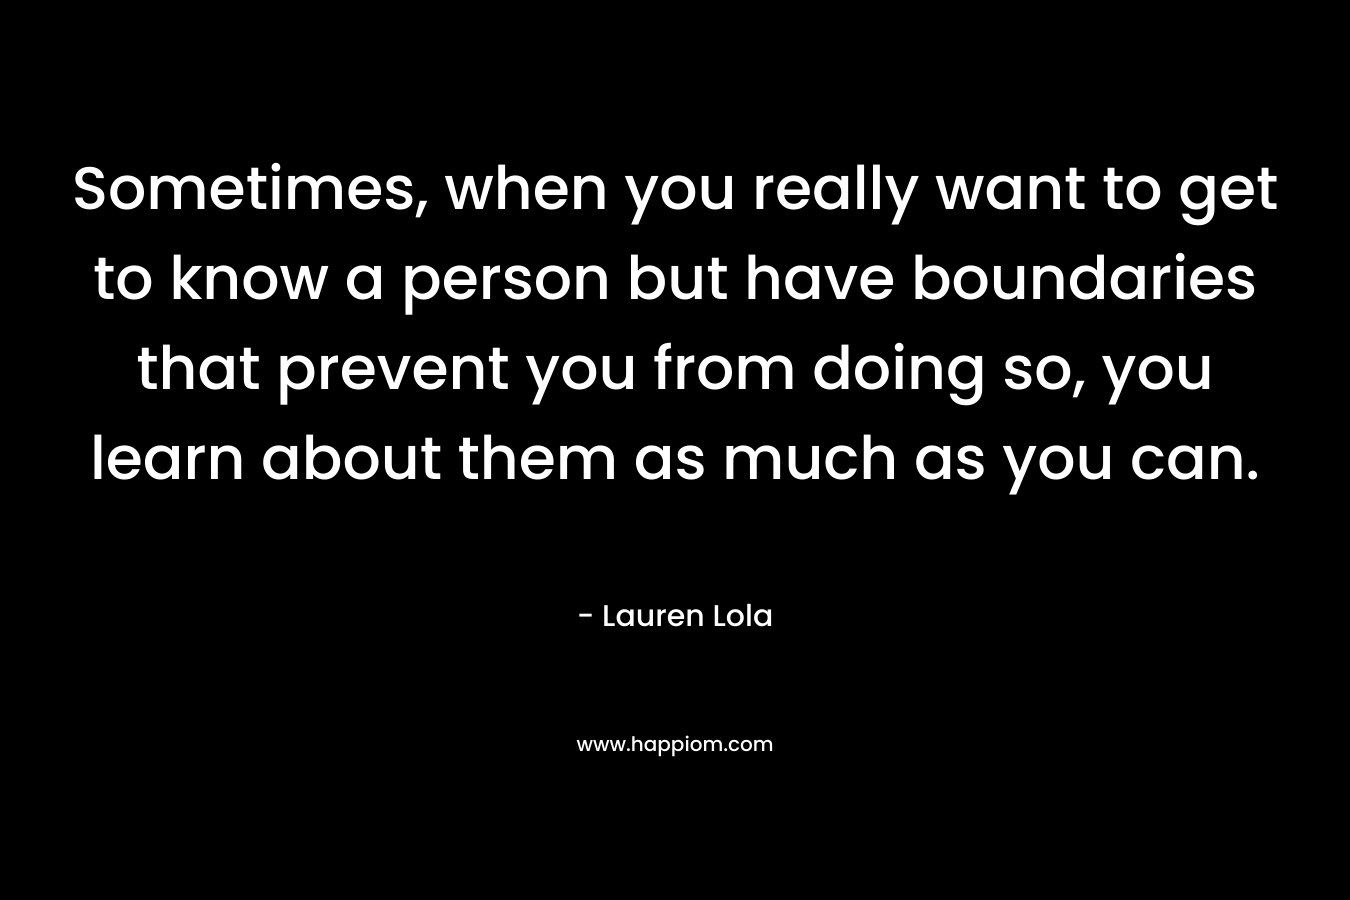 Sometimes, when you really want to get to know a person but have boundaries that prevent you from doing so, you learn about them as much as you can. – Lauren Lola